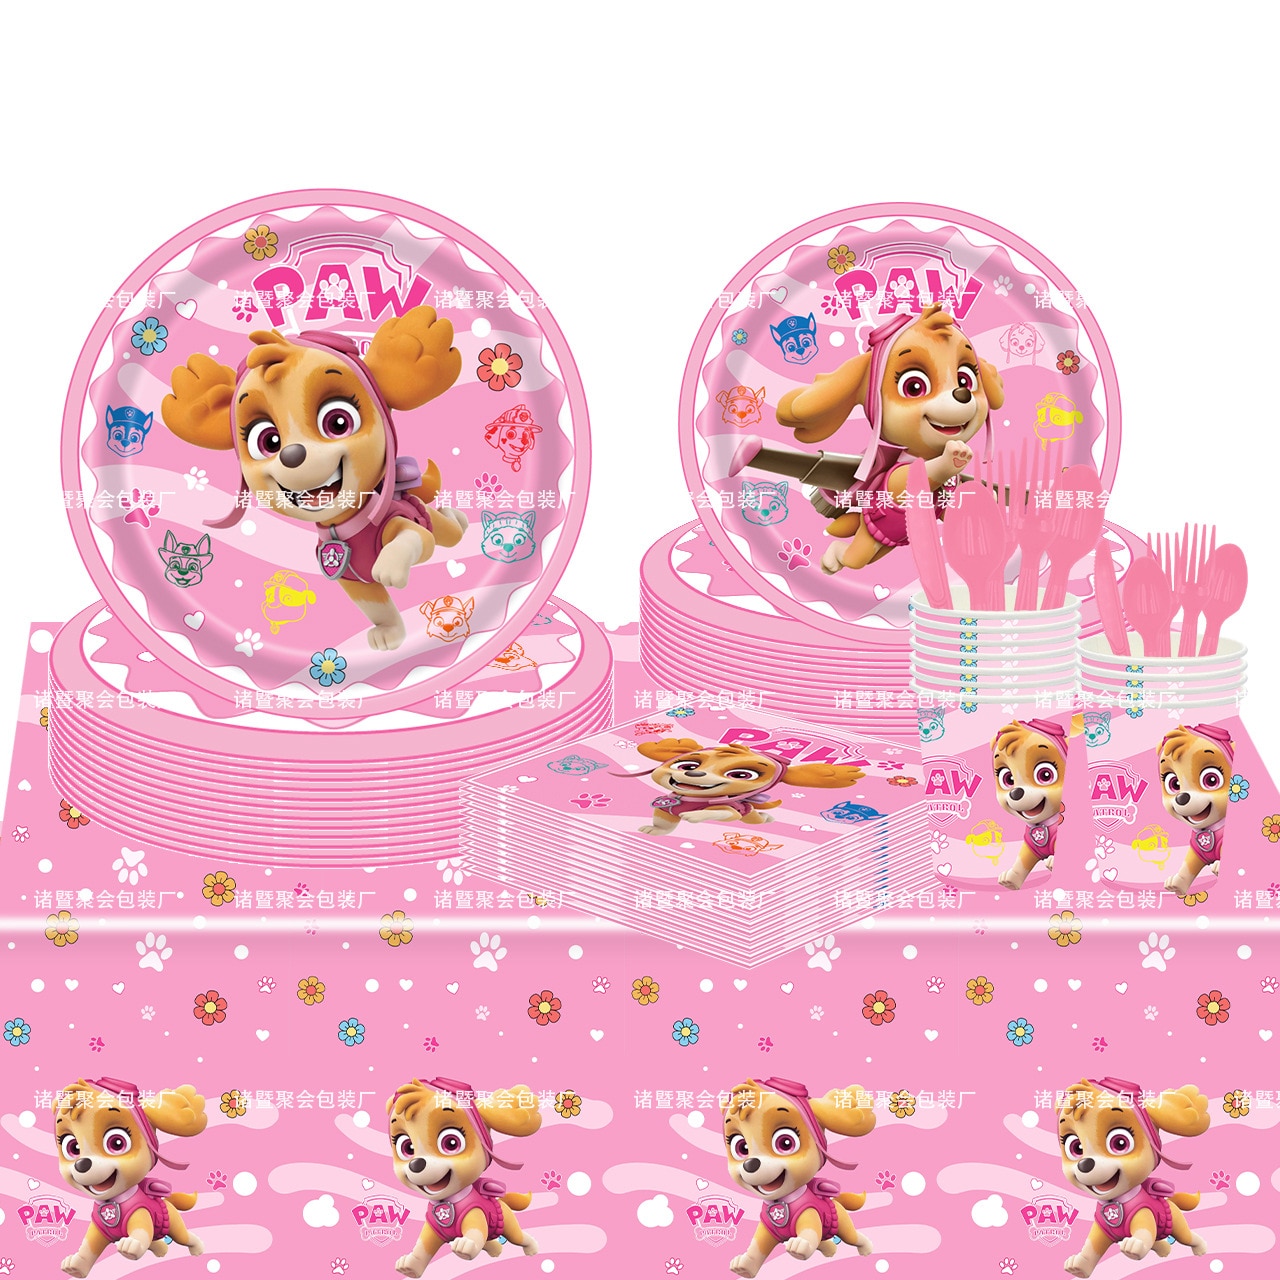 PAW Patrol Pink Skye Birthday Decoration Children Girl Tableware Paper Plate Cup Napkins Baby Shower Party 1 - Paw Patrol Plush